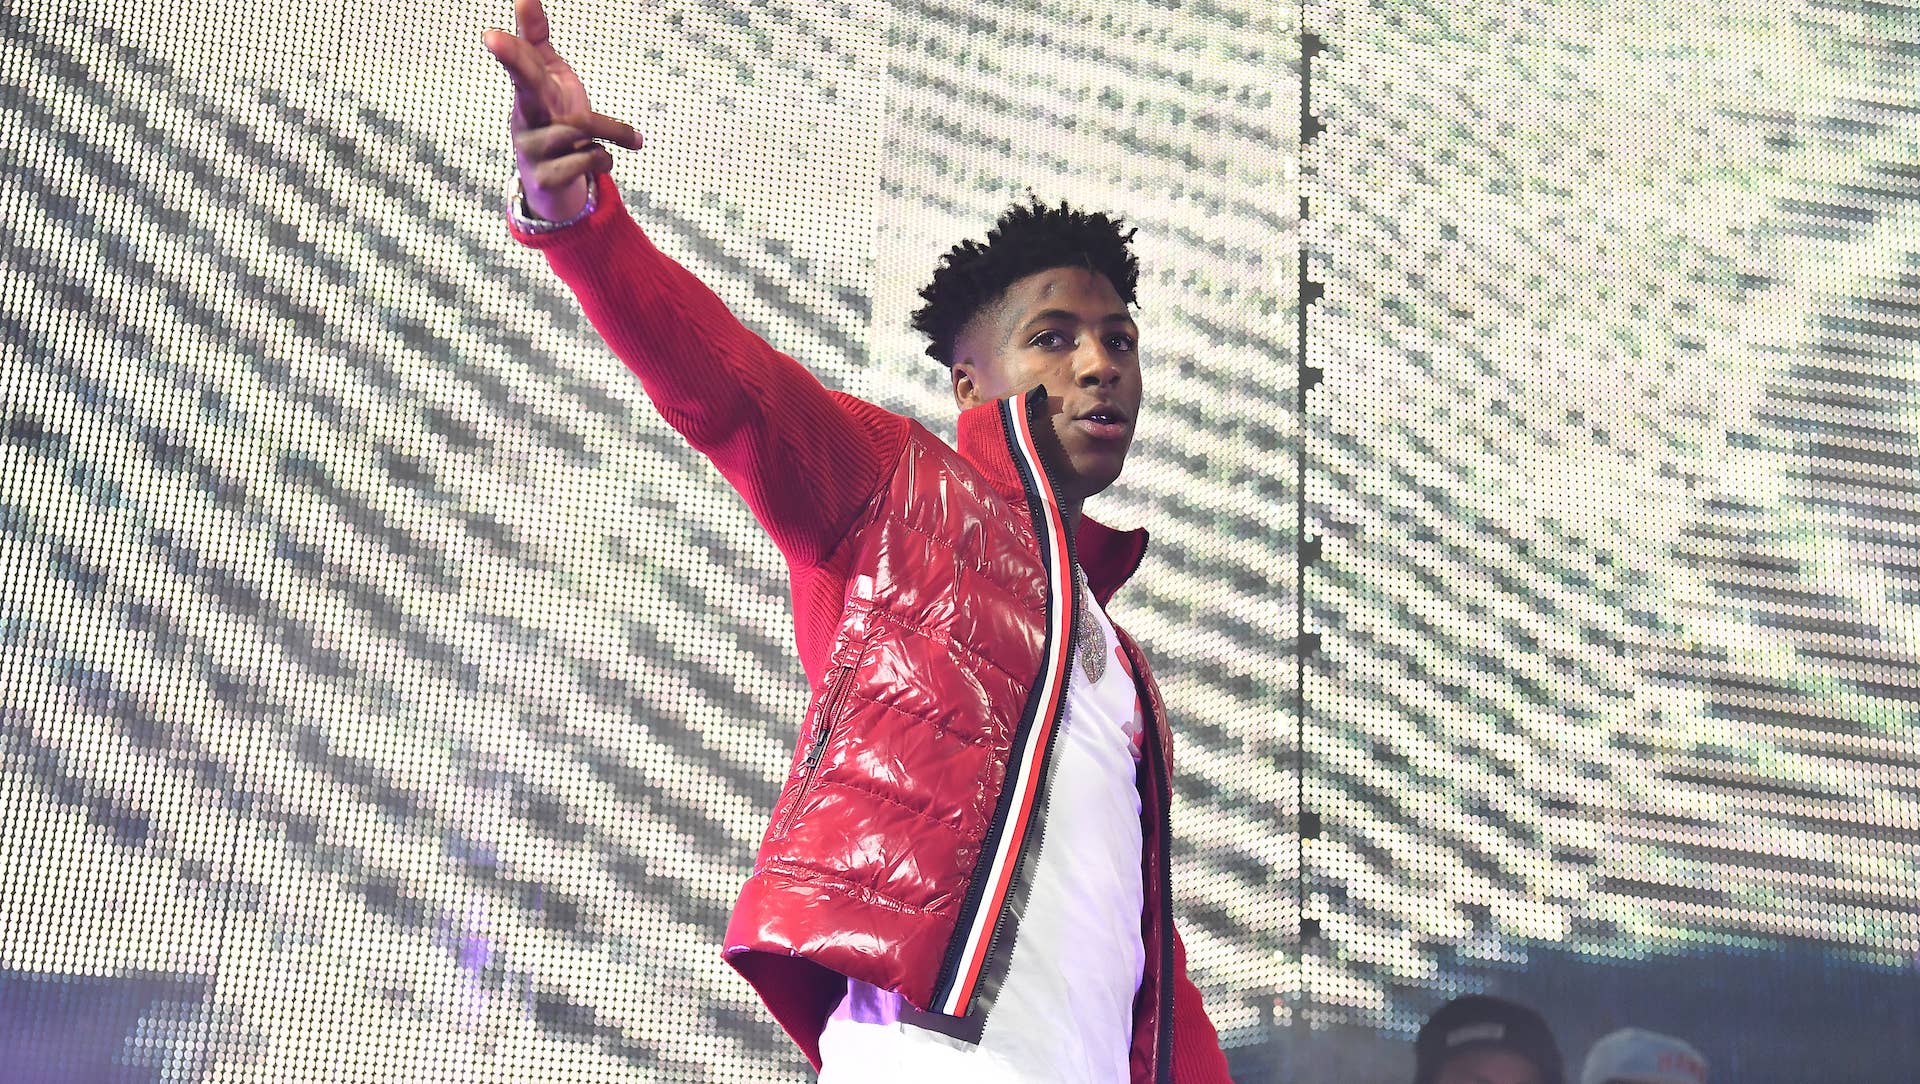 NBA YoungBoy performs onstage during Lil Baby & Friends concert